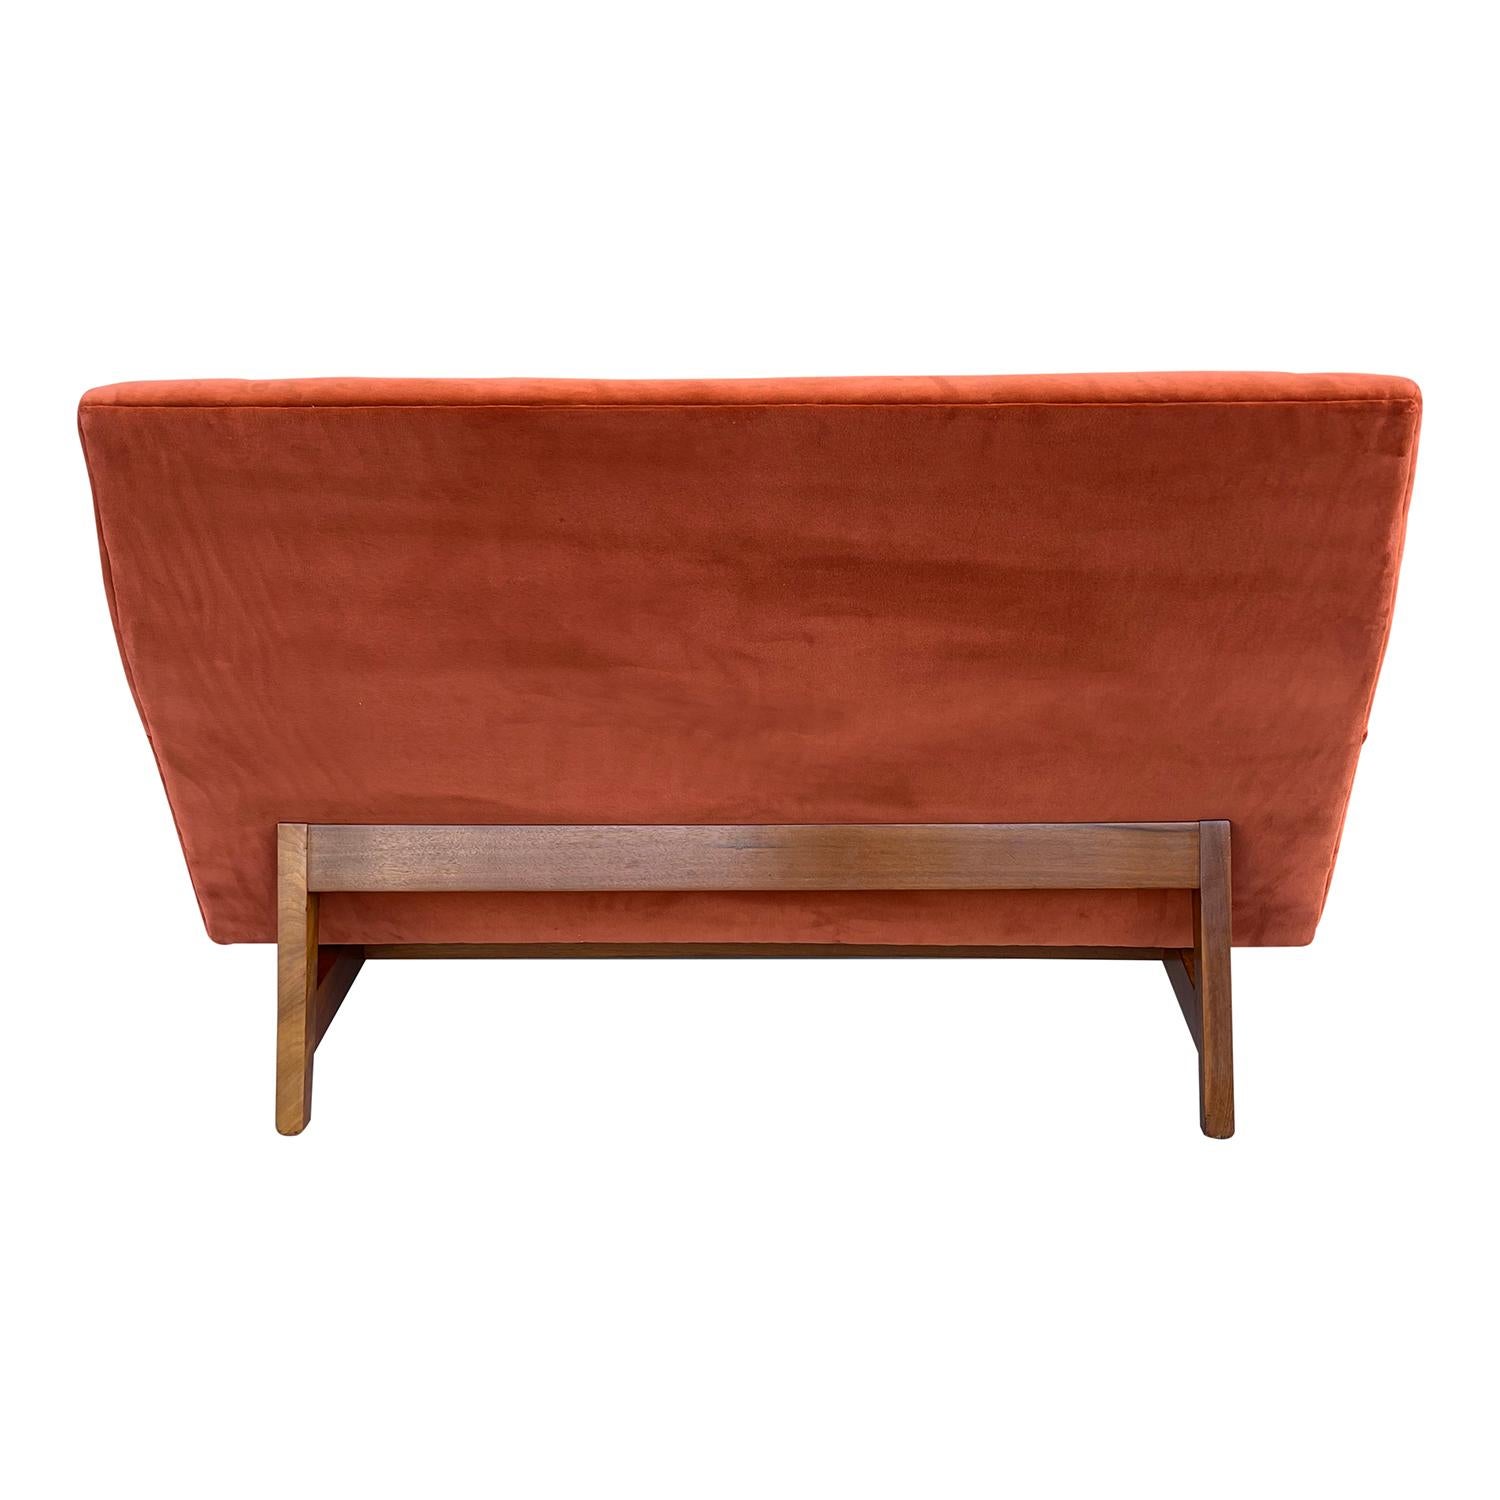 Hand-Crafted 20th Century American Two Seater Sofa - Walnut Settee by Jens Risom Design For Sale